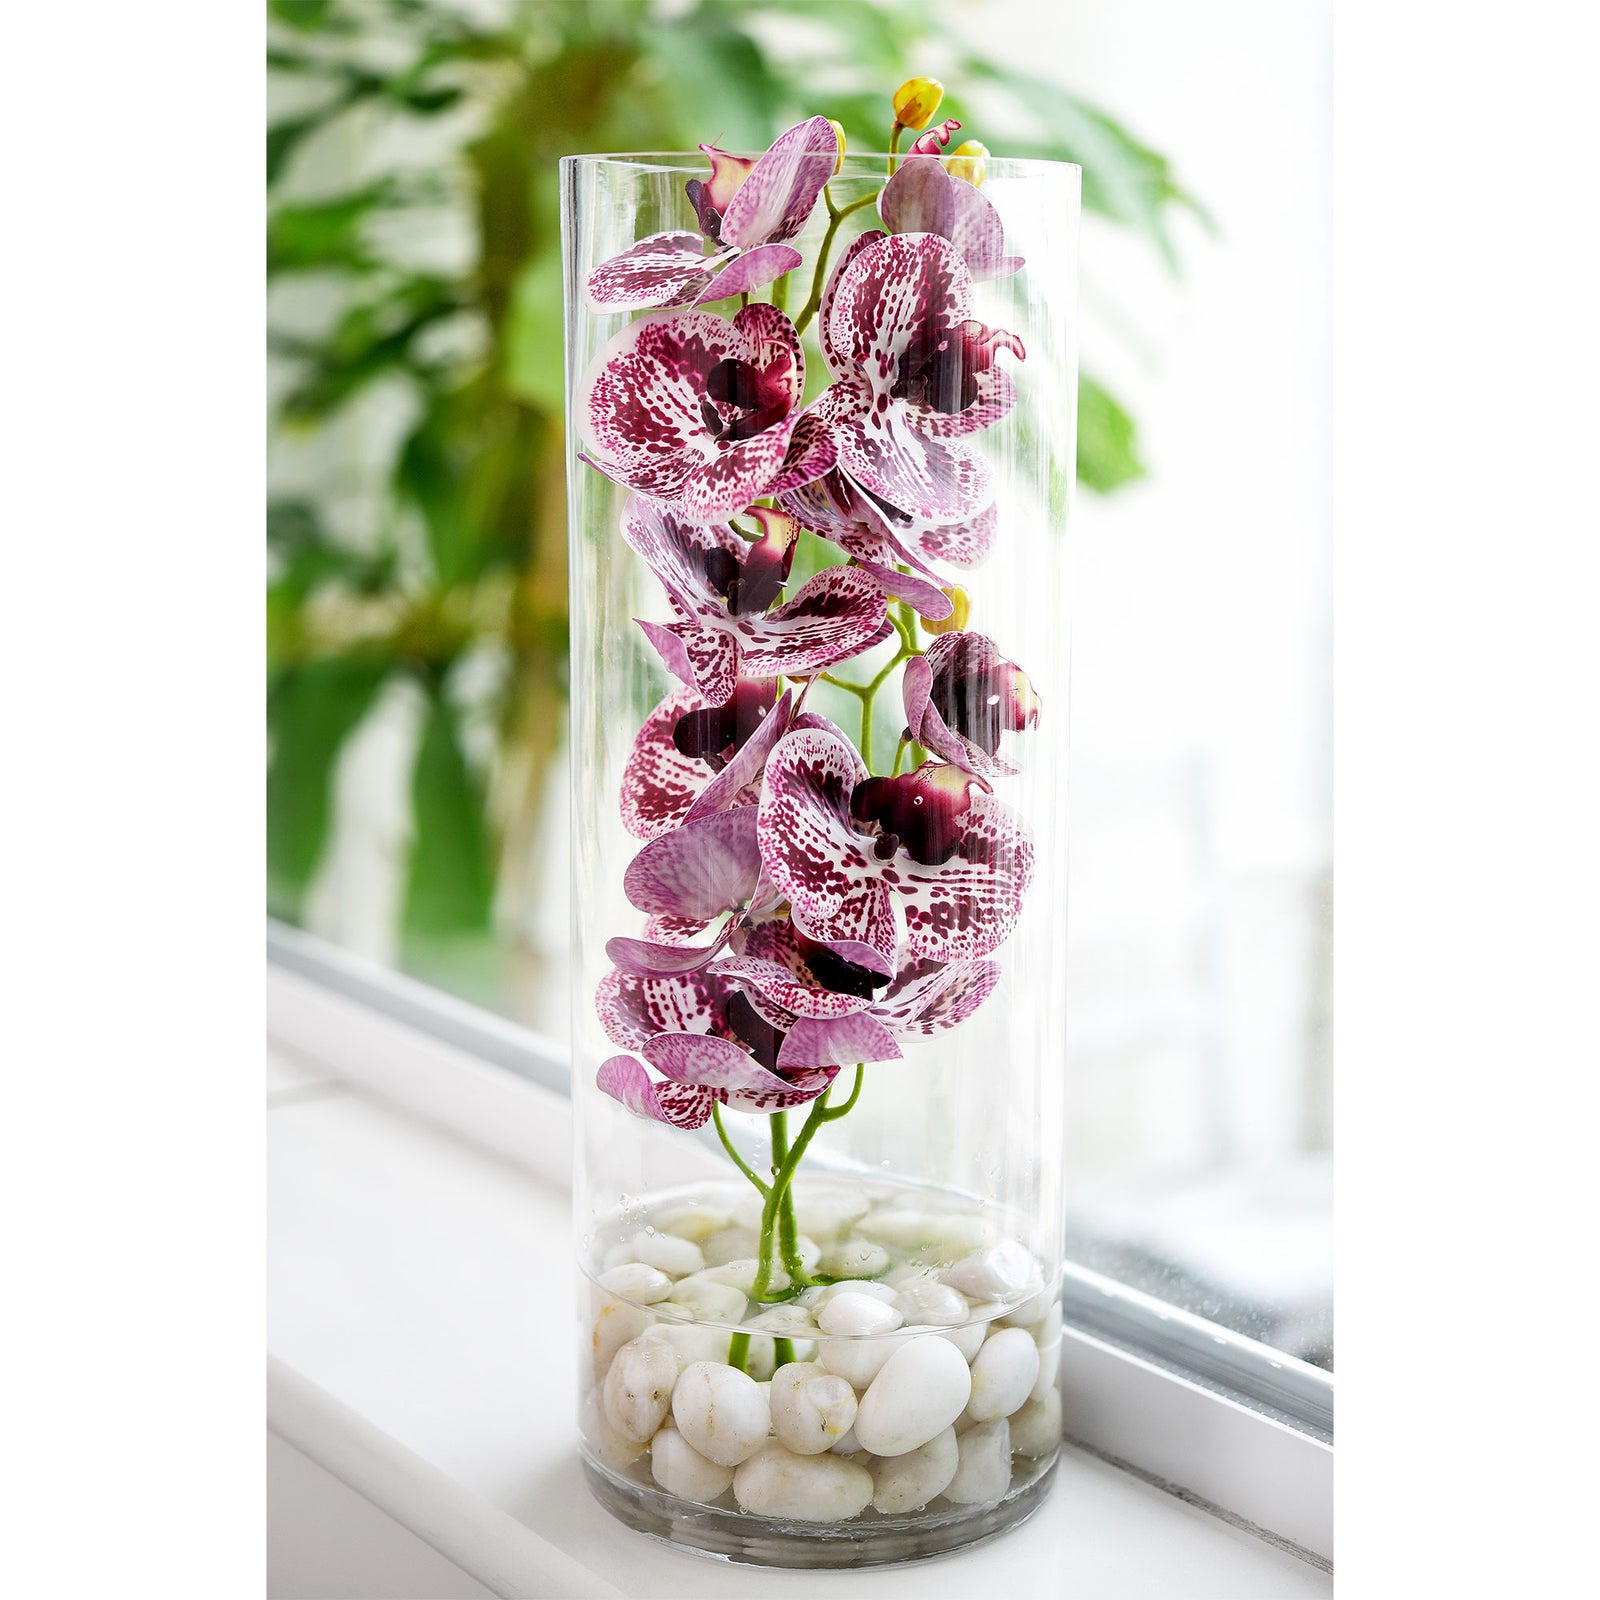 Dark Magenta 2 Stems Real Touch Artificial Butterfly Orchids/Moth Orchid/Phalaenopsis Flowers 27.6" Tall 70cm